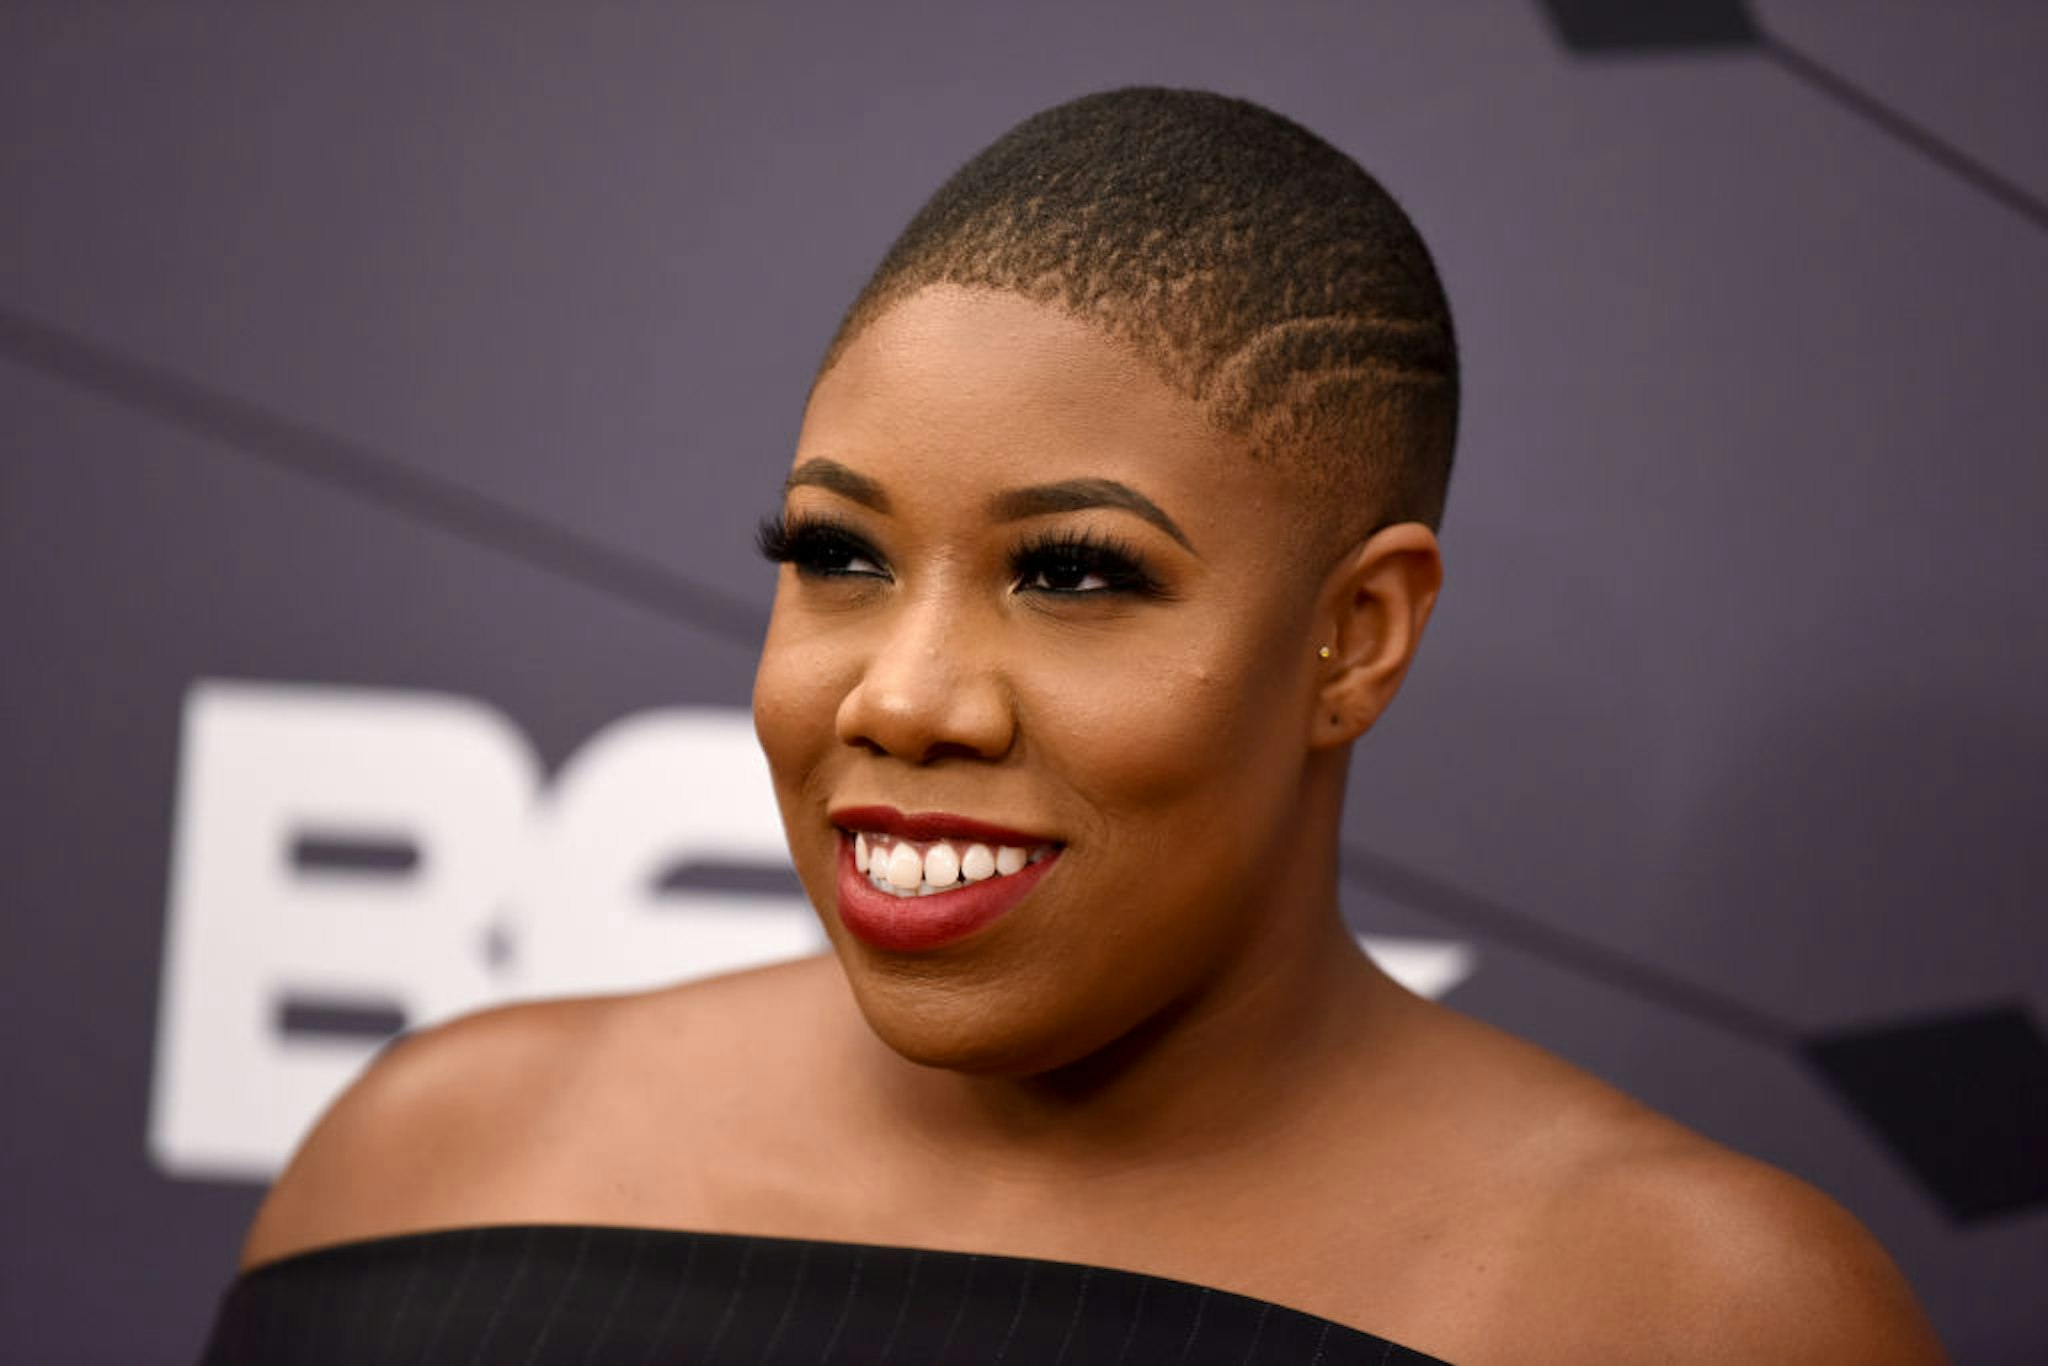 NEWARK, NJ - AUGUST 26: Symone Sanders attends the Black Girls Rock! 2018 Red Carpet at NJPAC on August 26, 2018 in Newark, New Jersey. (Photo by Dave Kotinsky/Getty Images for BET)